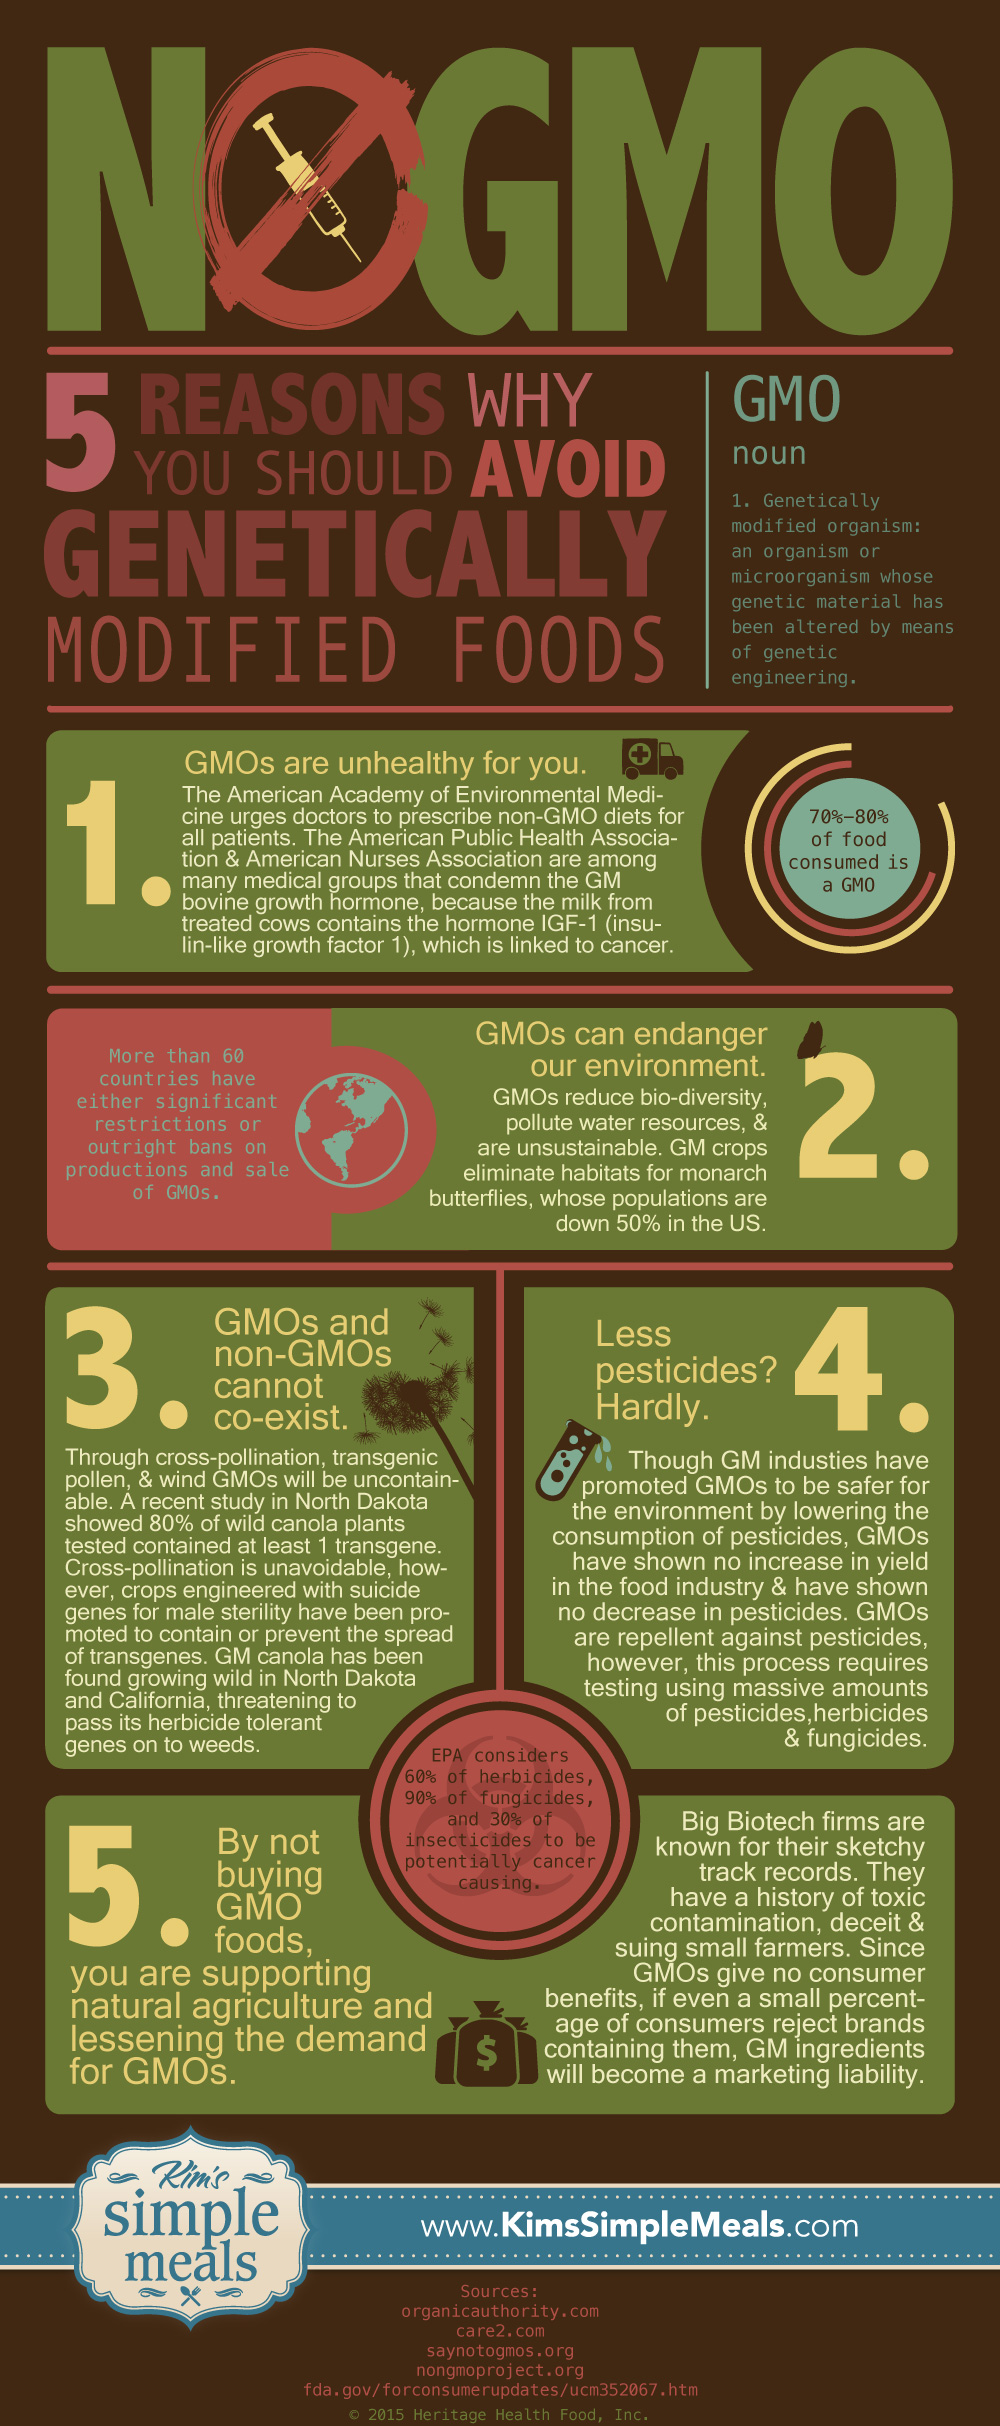 5 reasons to not eat GMO foods